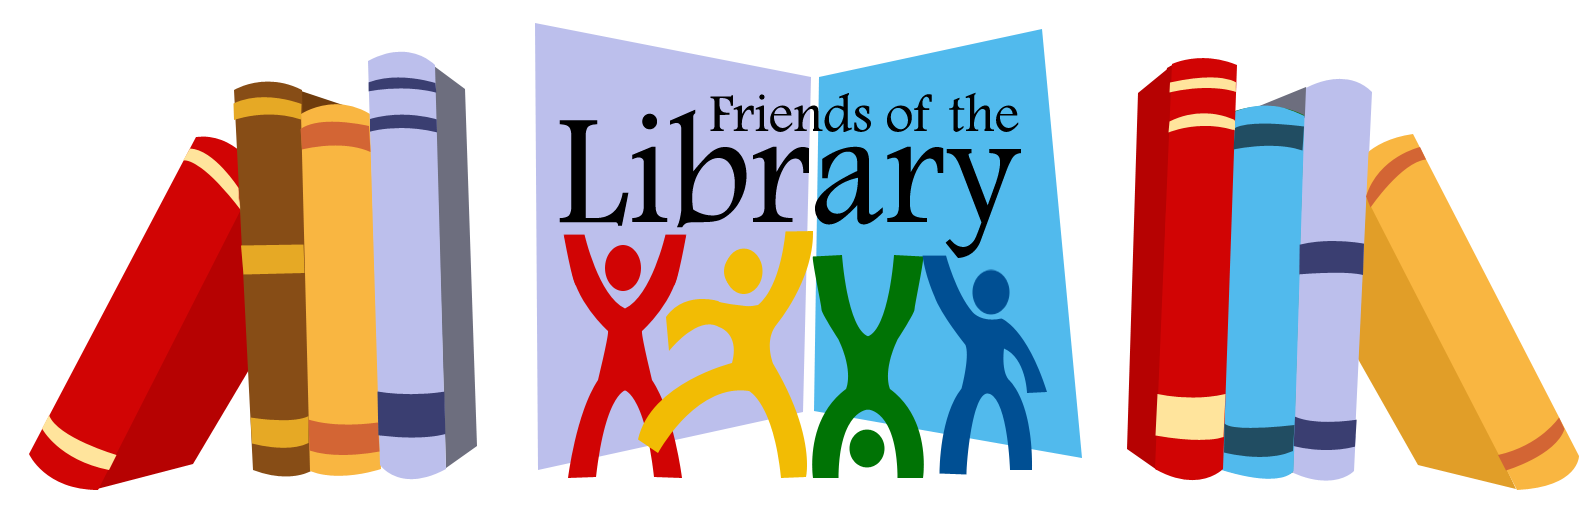 Friends of the Library Clinton Public Library